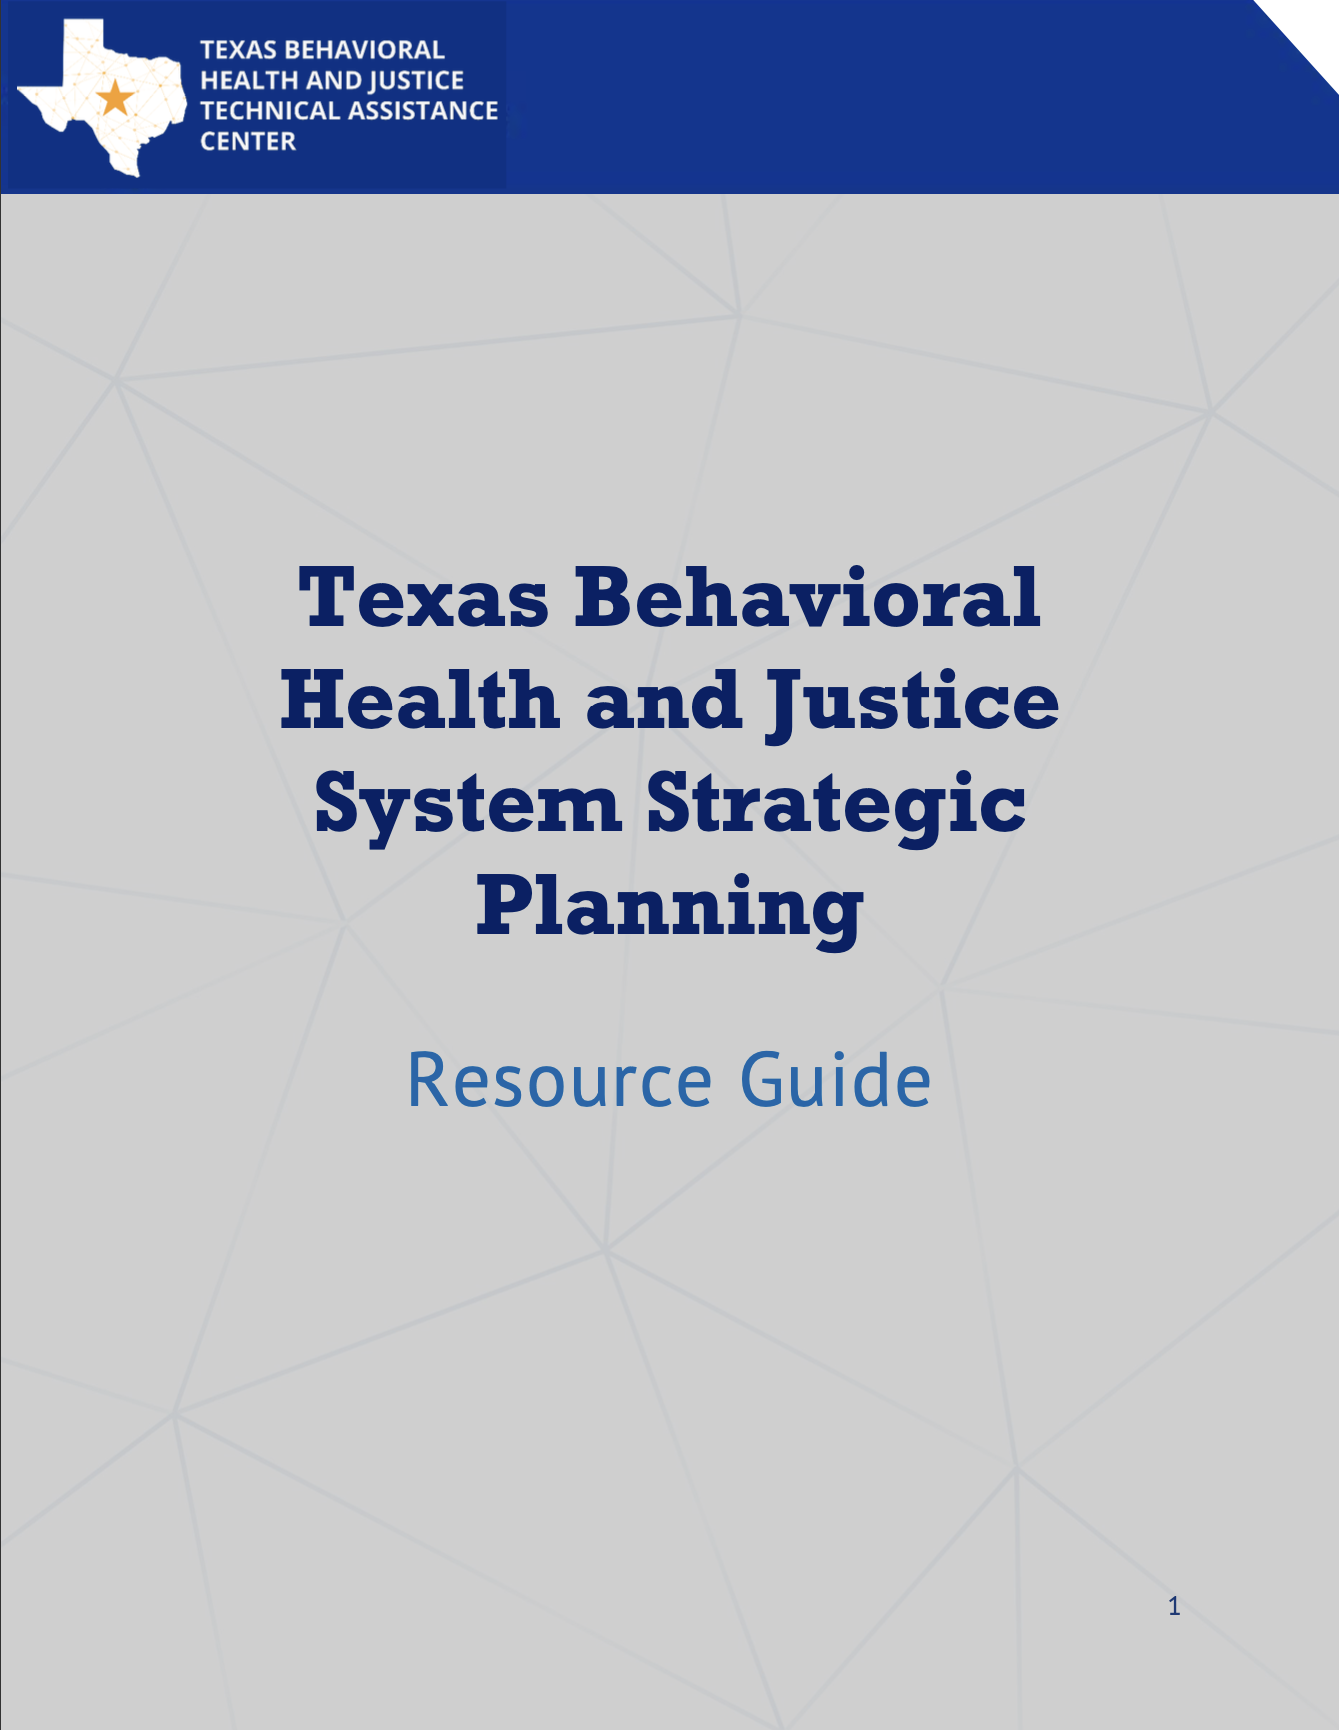 Texas Behavioral Health and Justice System Strategic Planning Resource Guide